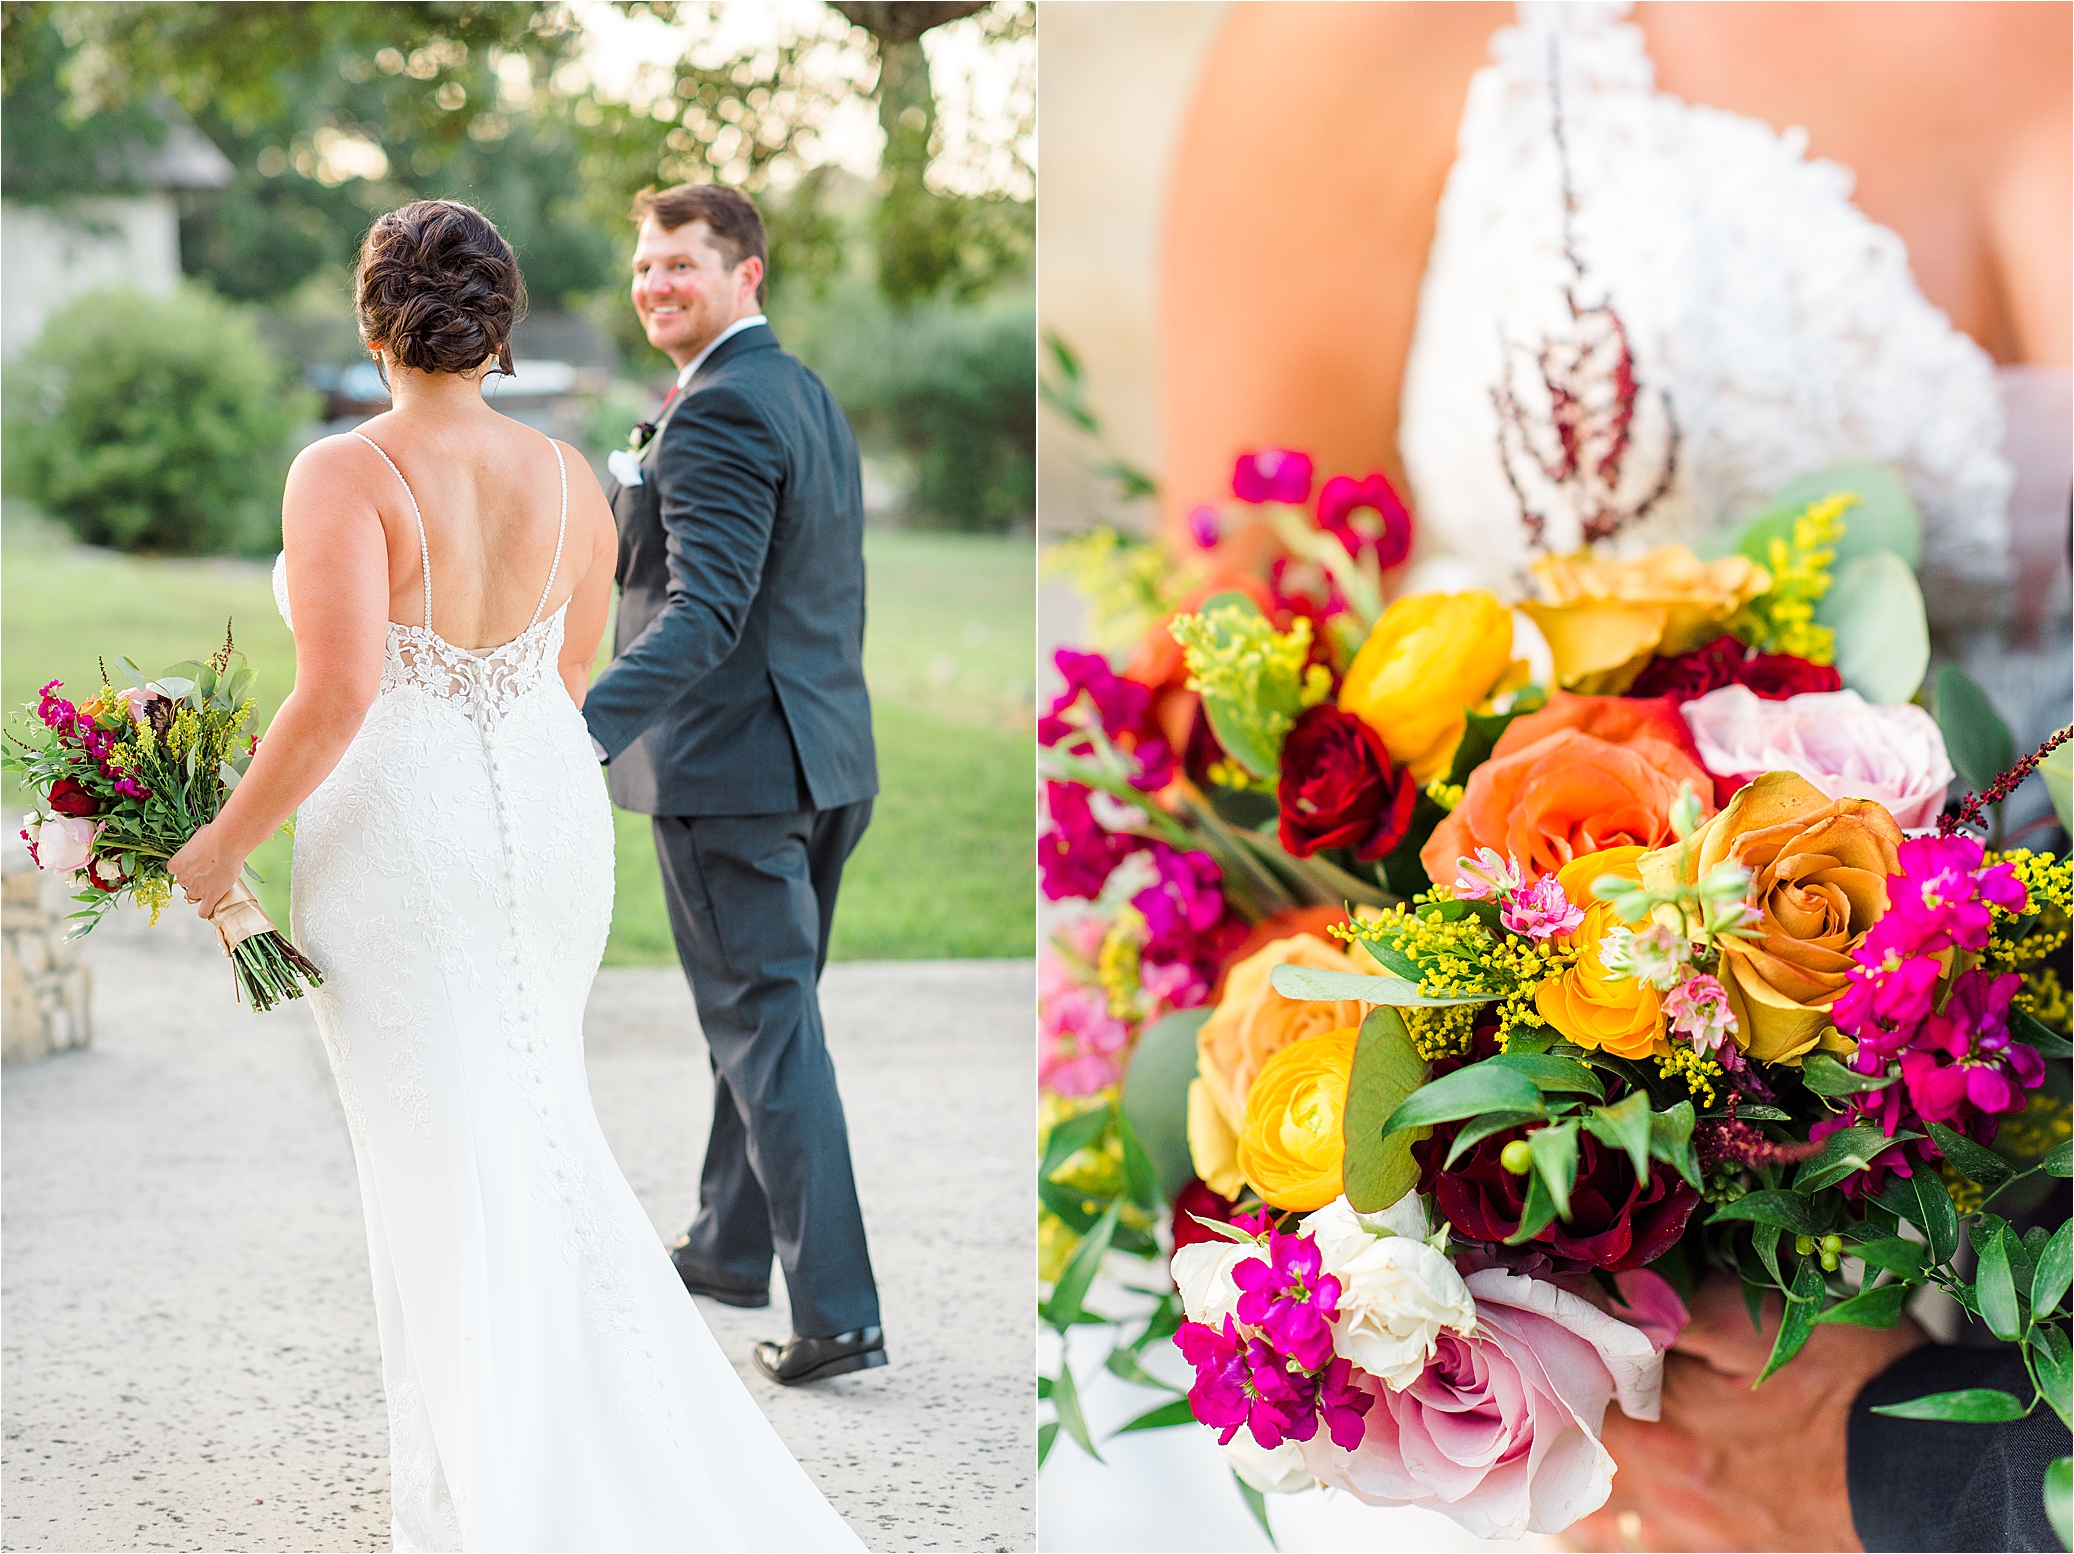 Color wedding bouquet on a wedding day at Paniolo Ranch in Boerne, Texas